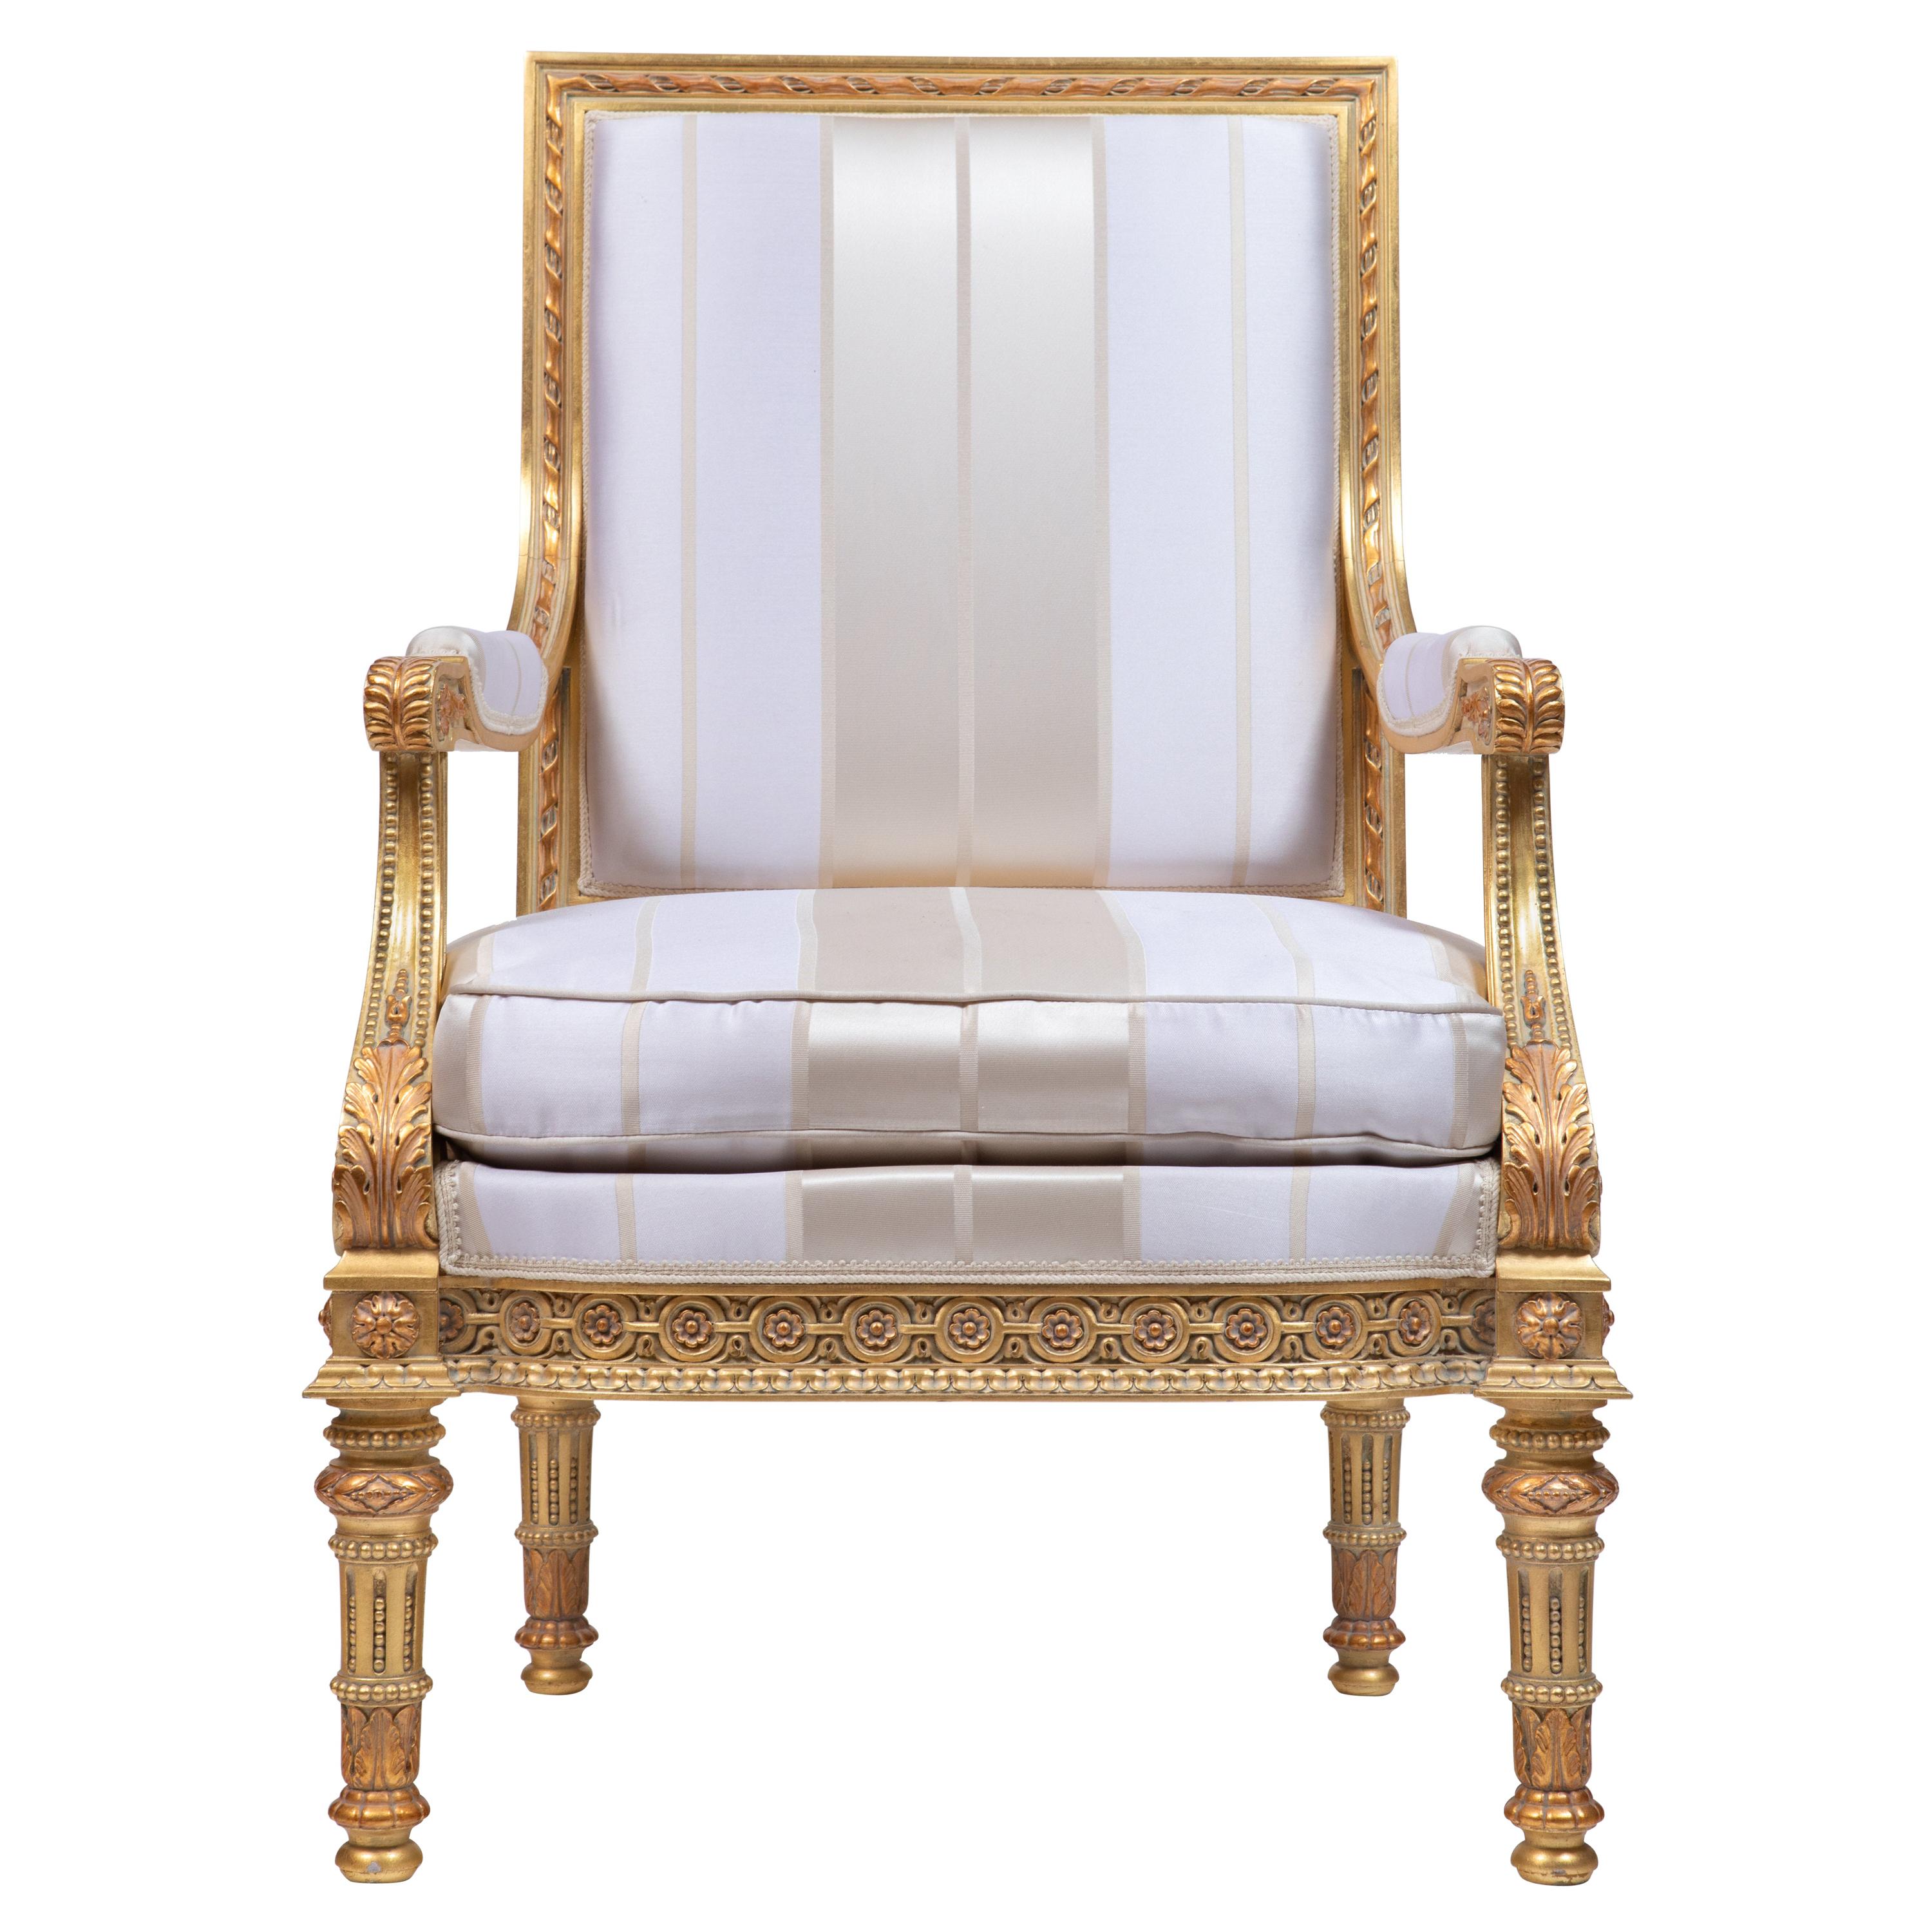 Luis XVI Armchair, Wood Frame Hand Carved, Gold Leaf Finishing, Made in Italy